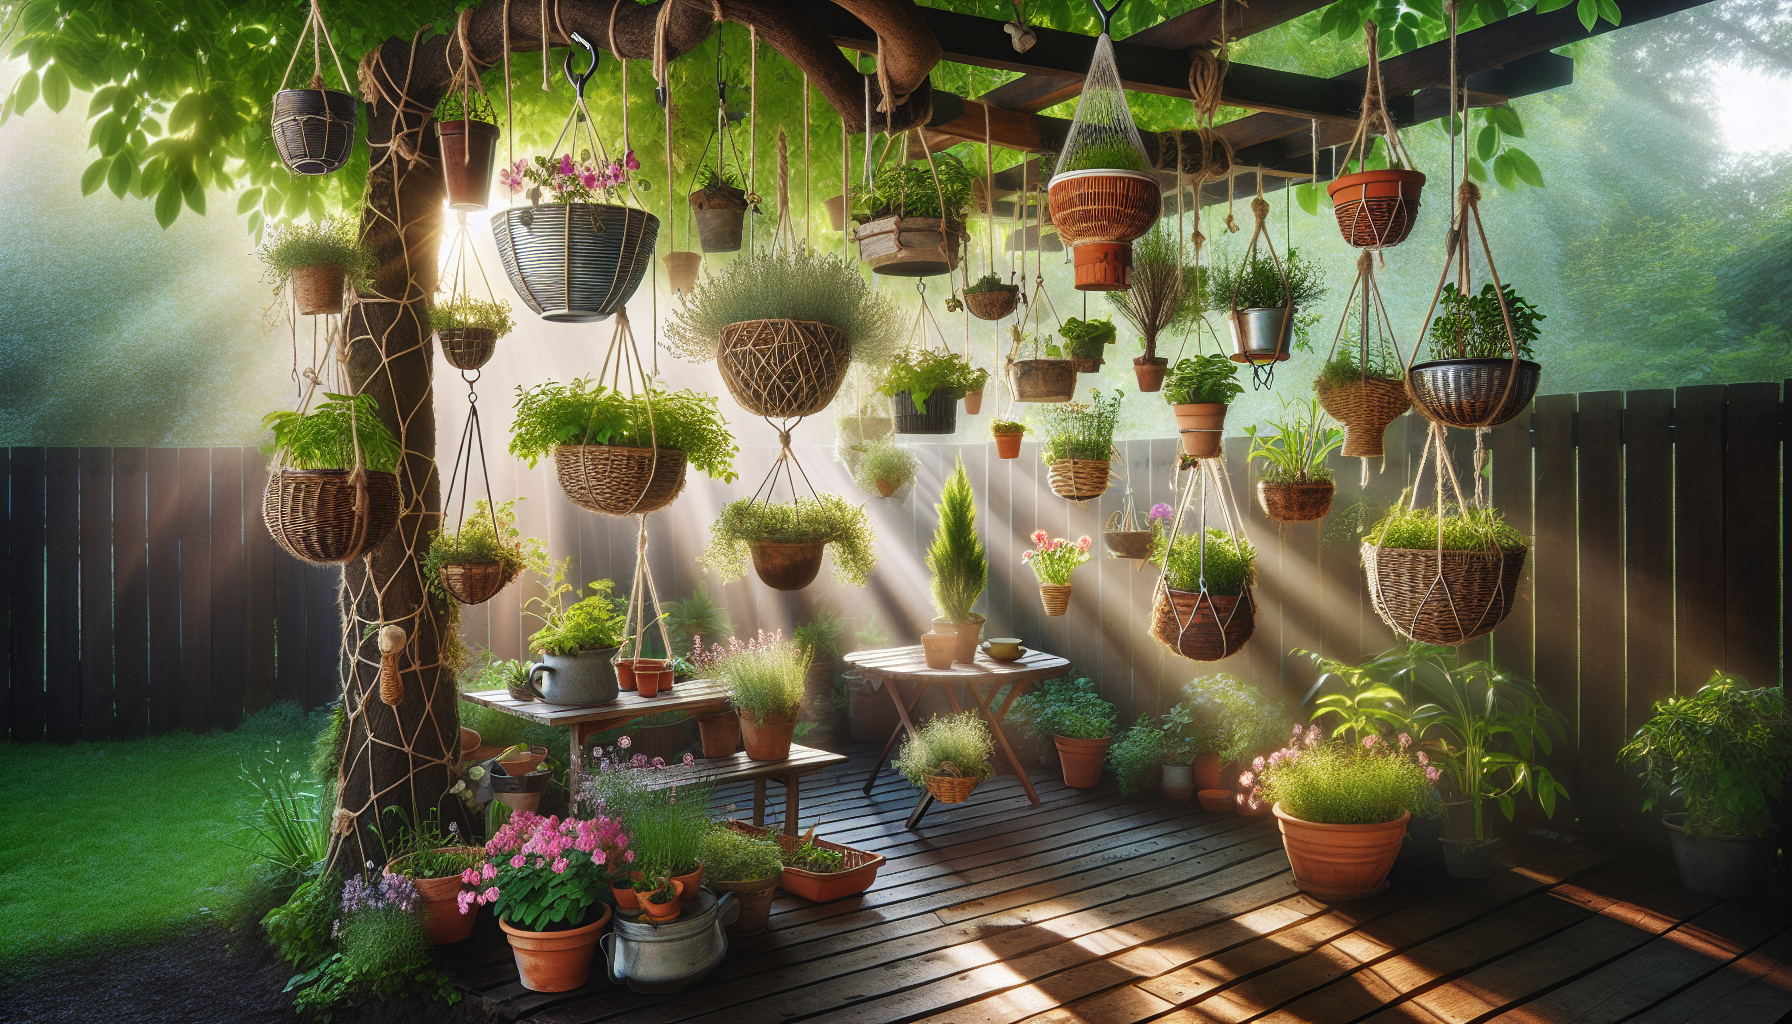 Transform your garden: the innovative IKEA hack for hanging plants